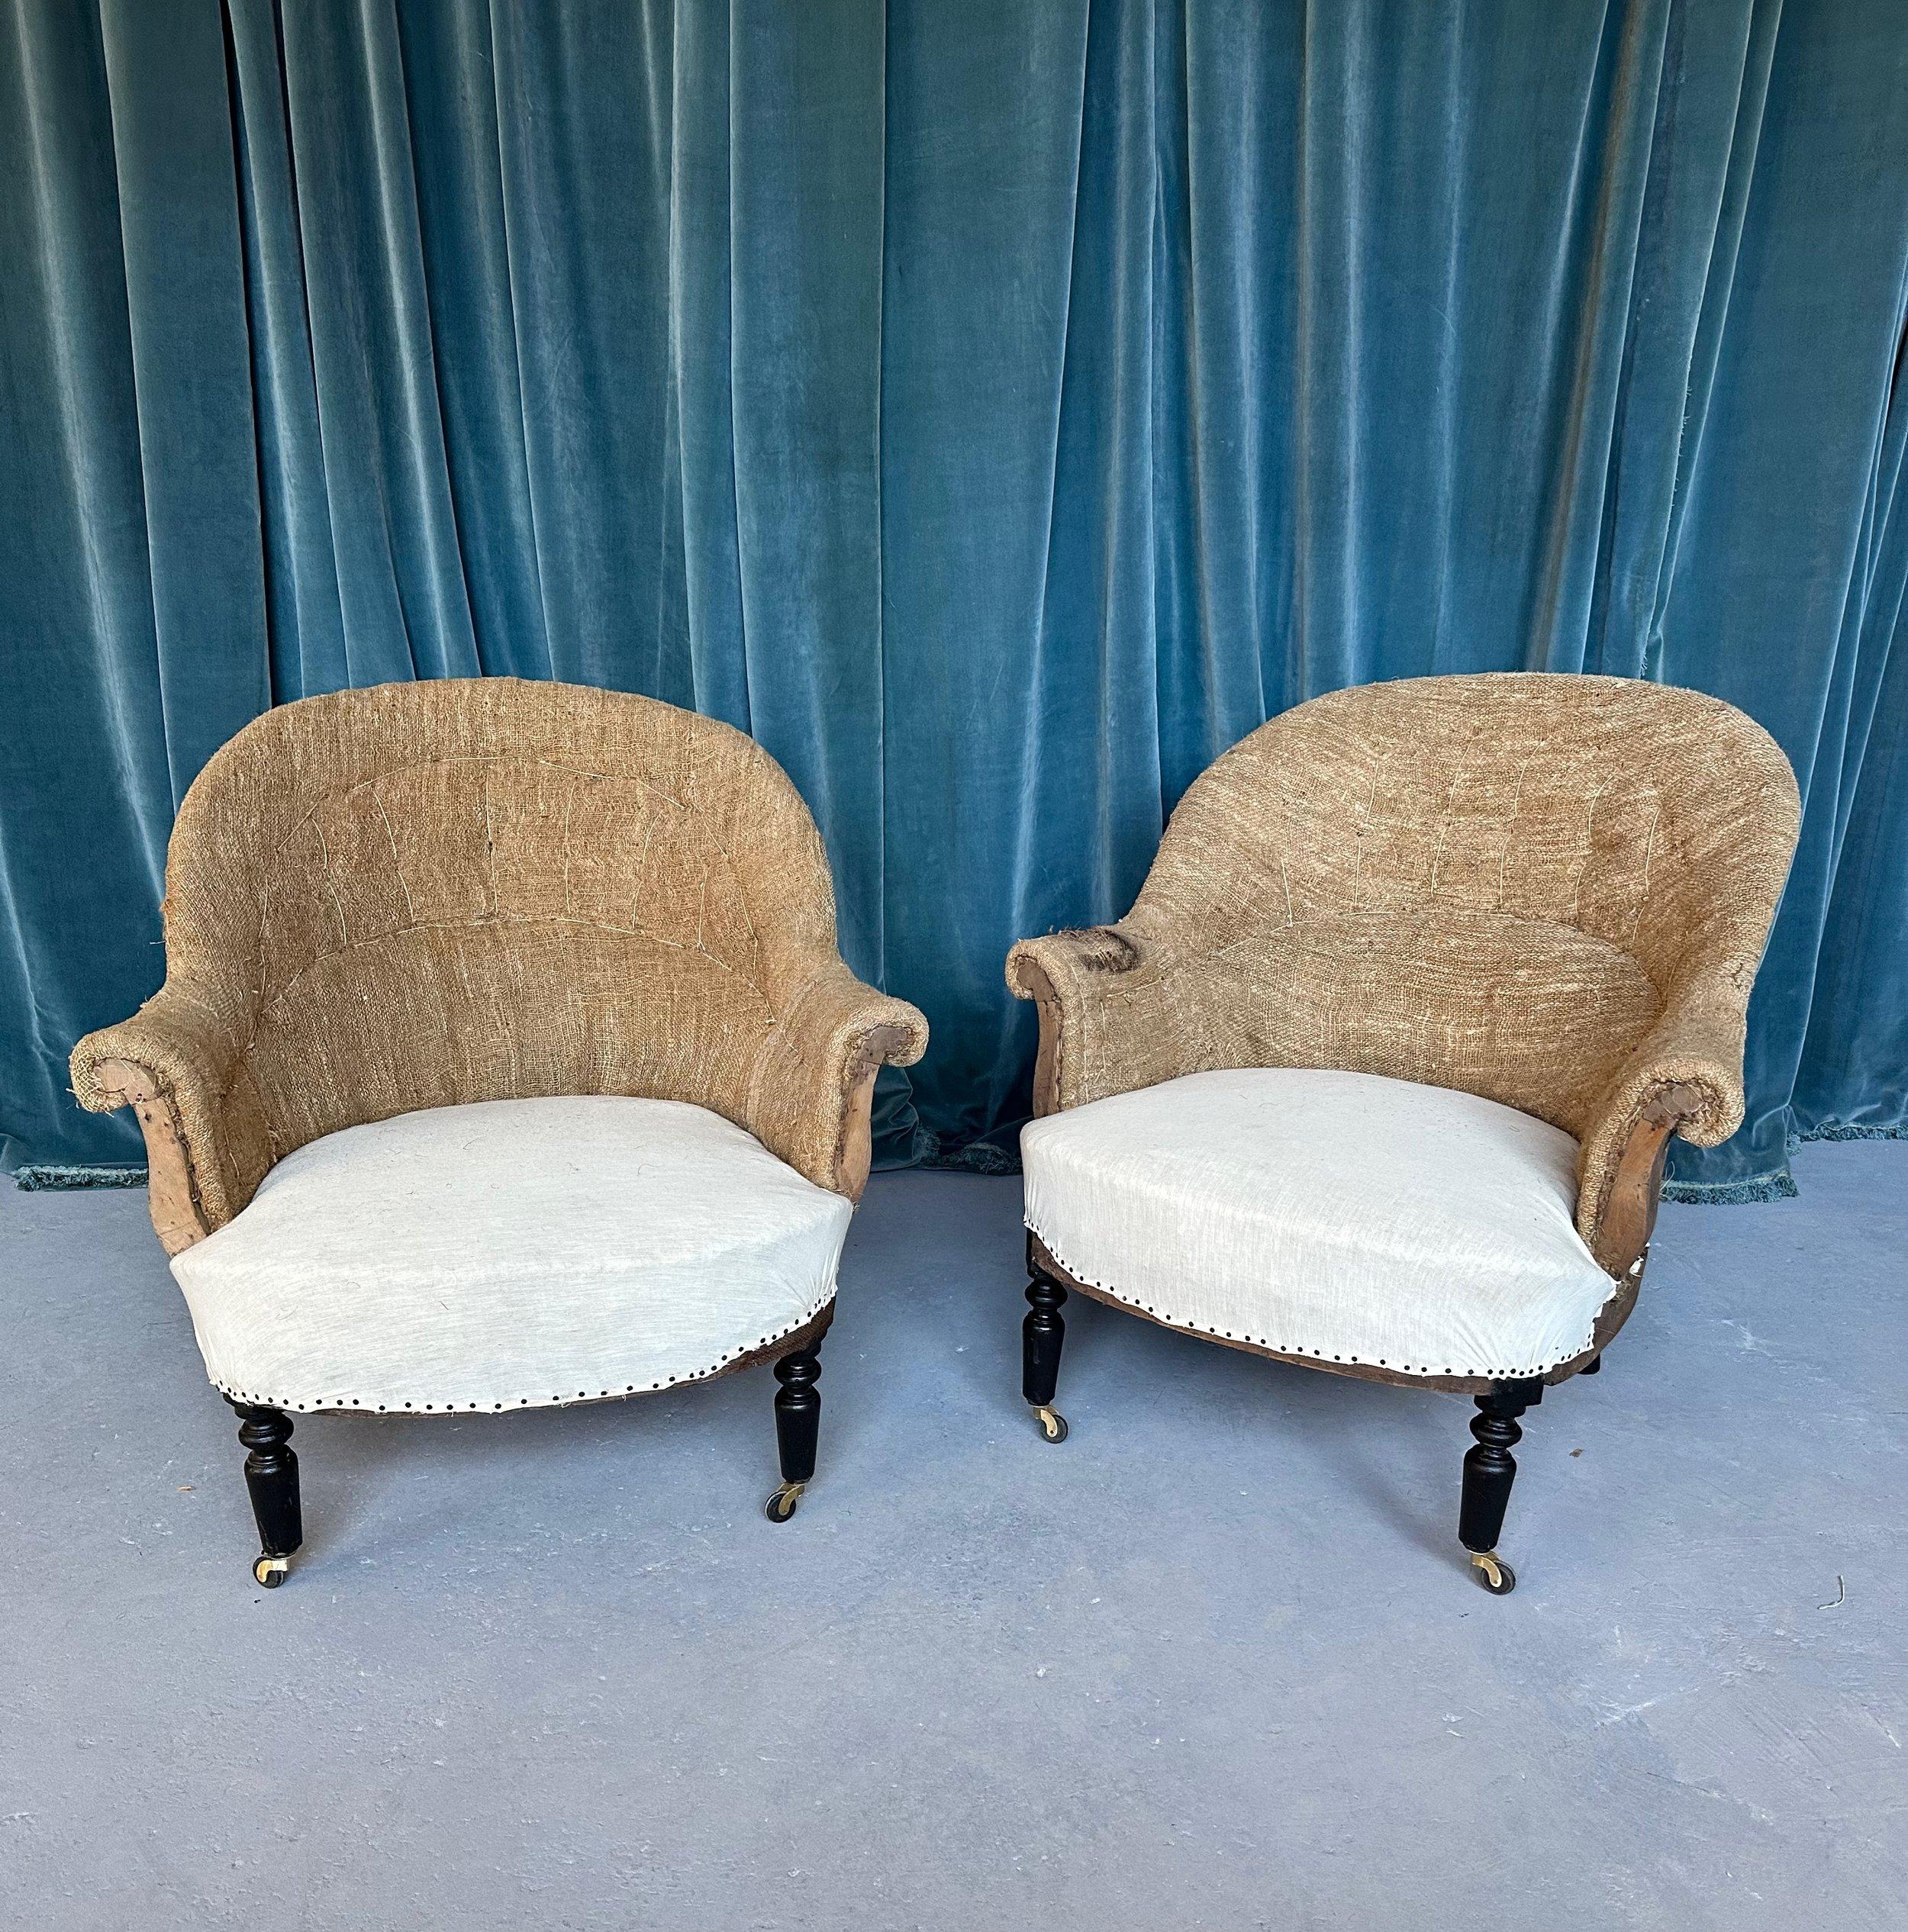 A classic pair of French 19th century Napoleon III style armchairs with gracious rounded backs and gently scrolled arms. These chairs are designed with impeccable proportions, featuring a generously curved back that offers outstanding lumbar support